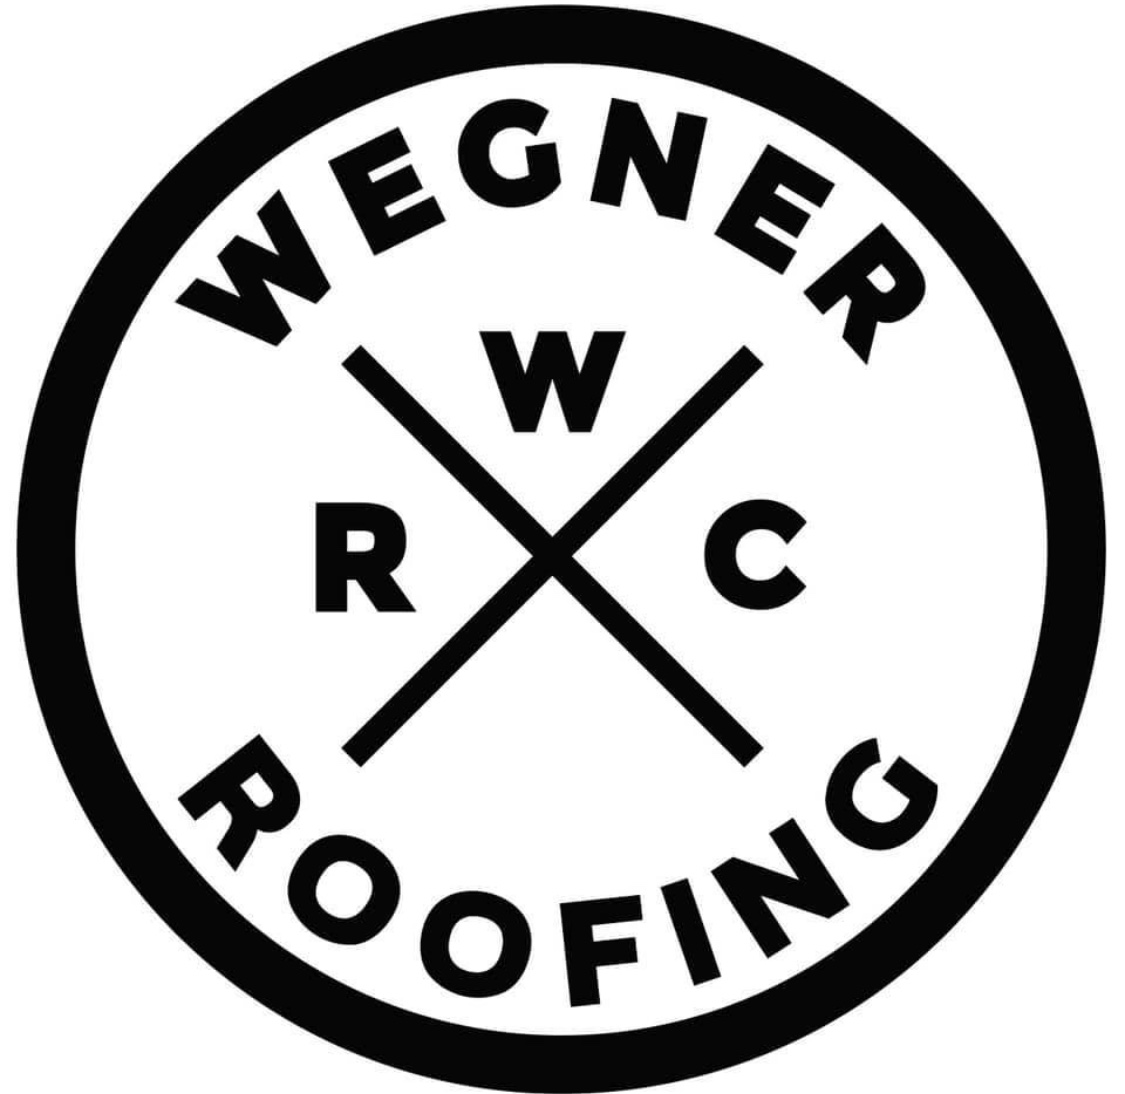 Wegner Roofing Explains How Roof Inspections Can Save Thousands of Dollars